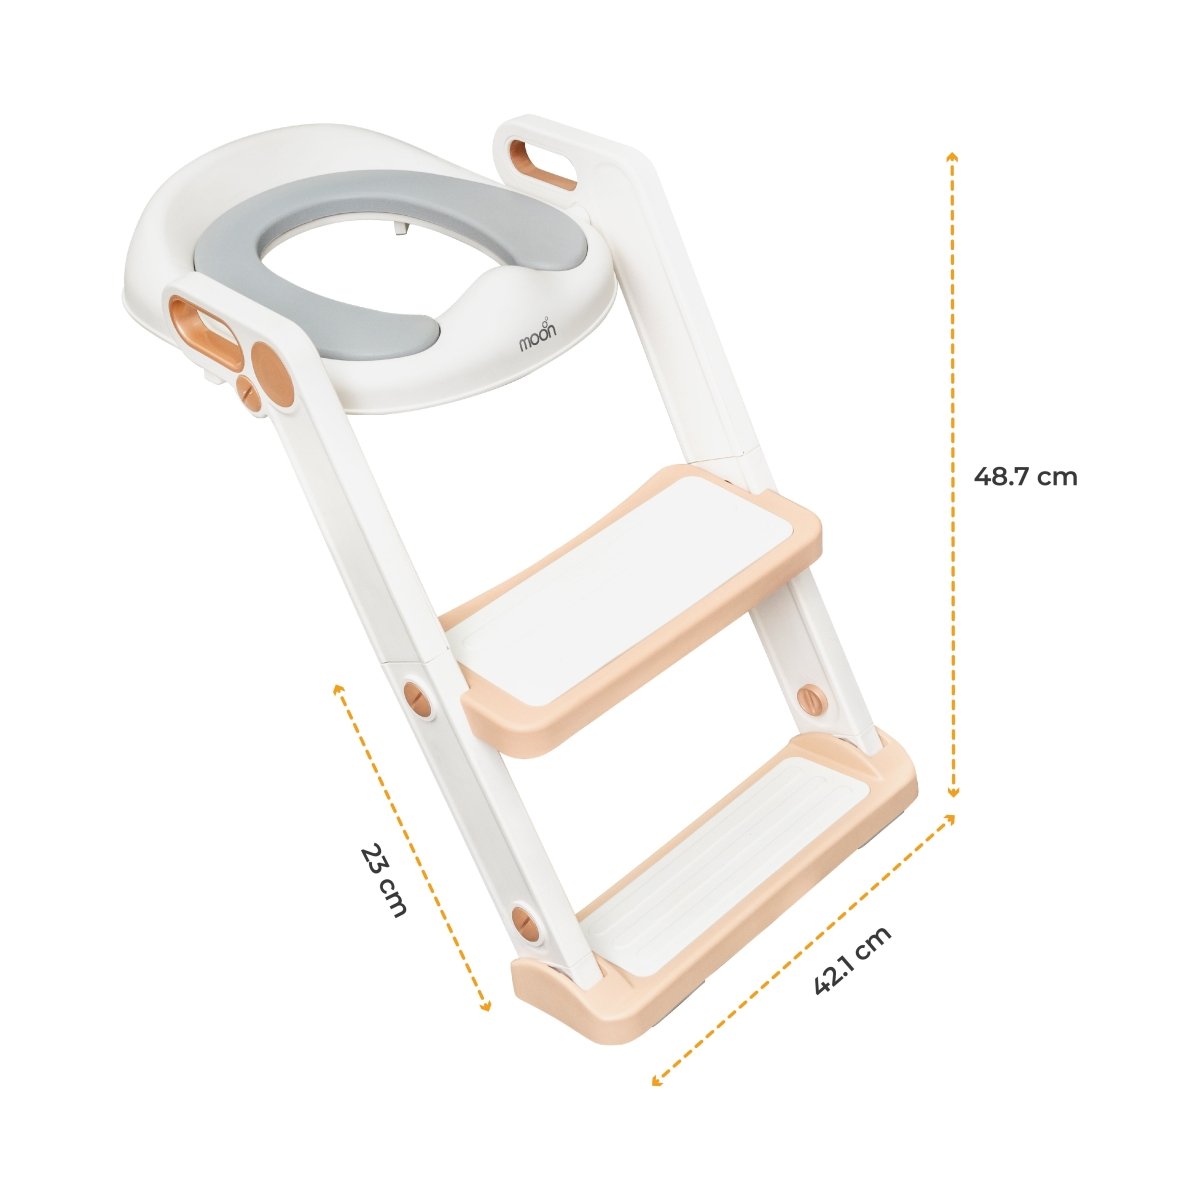 Moon Kids Step Stool Potty Trainer Seat Potty Training White and gold - MNNSPT06